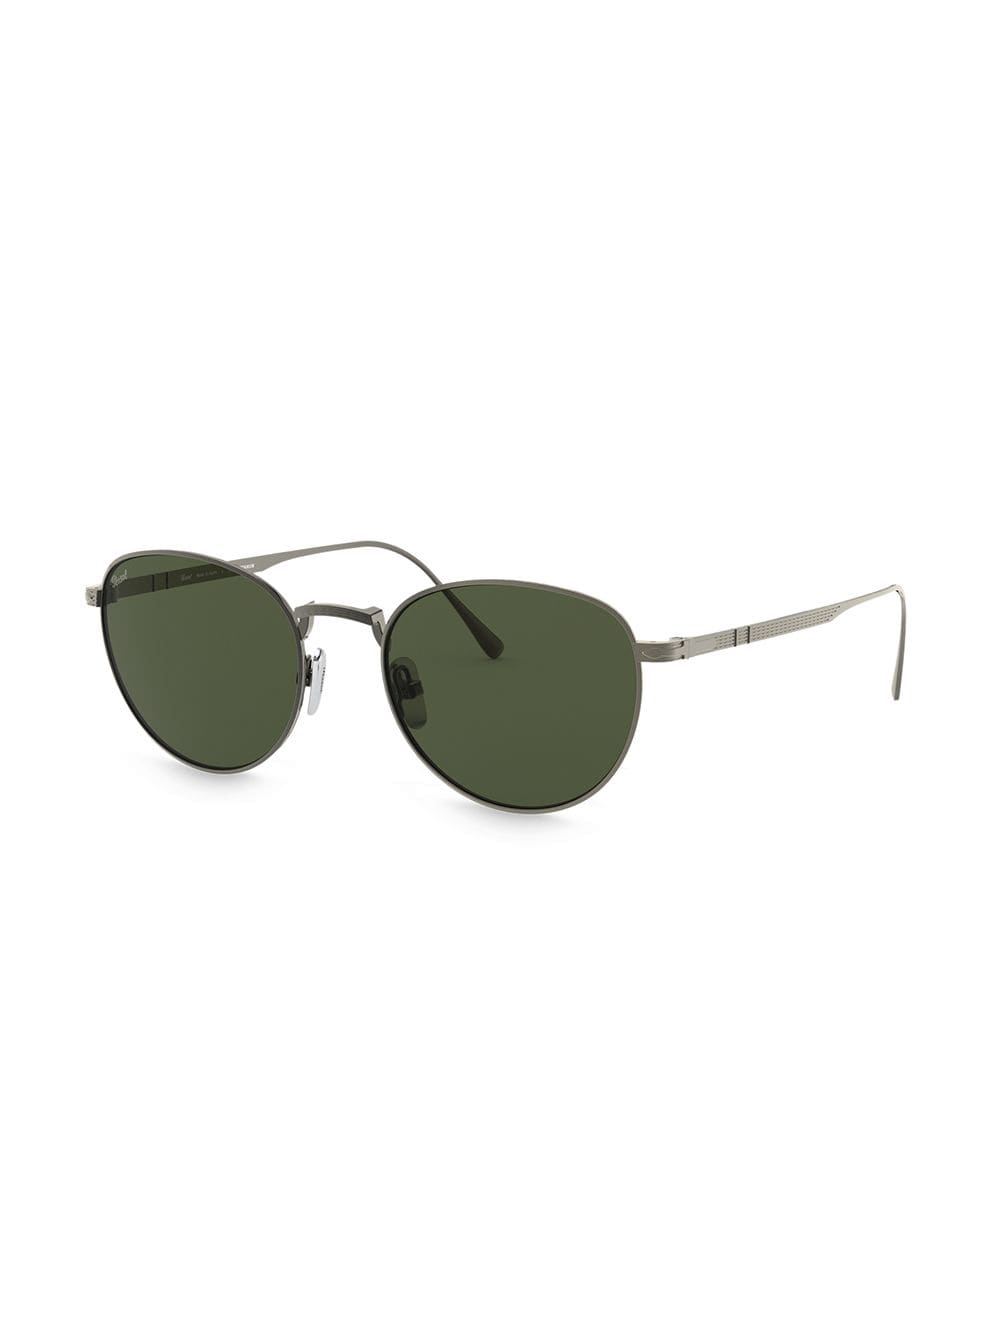 Image 2 of Persol round frame sunglasses